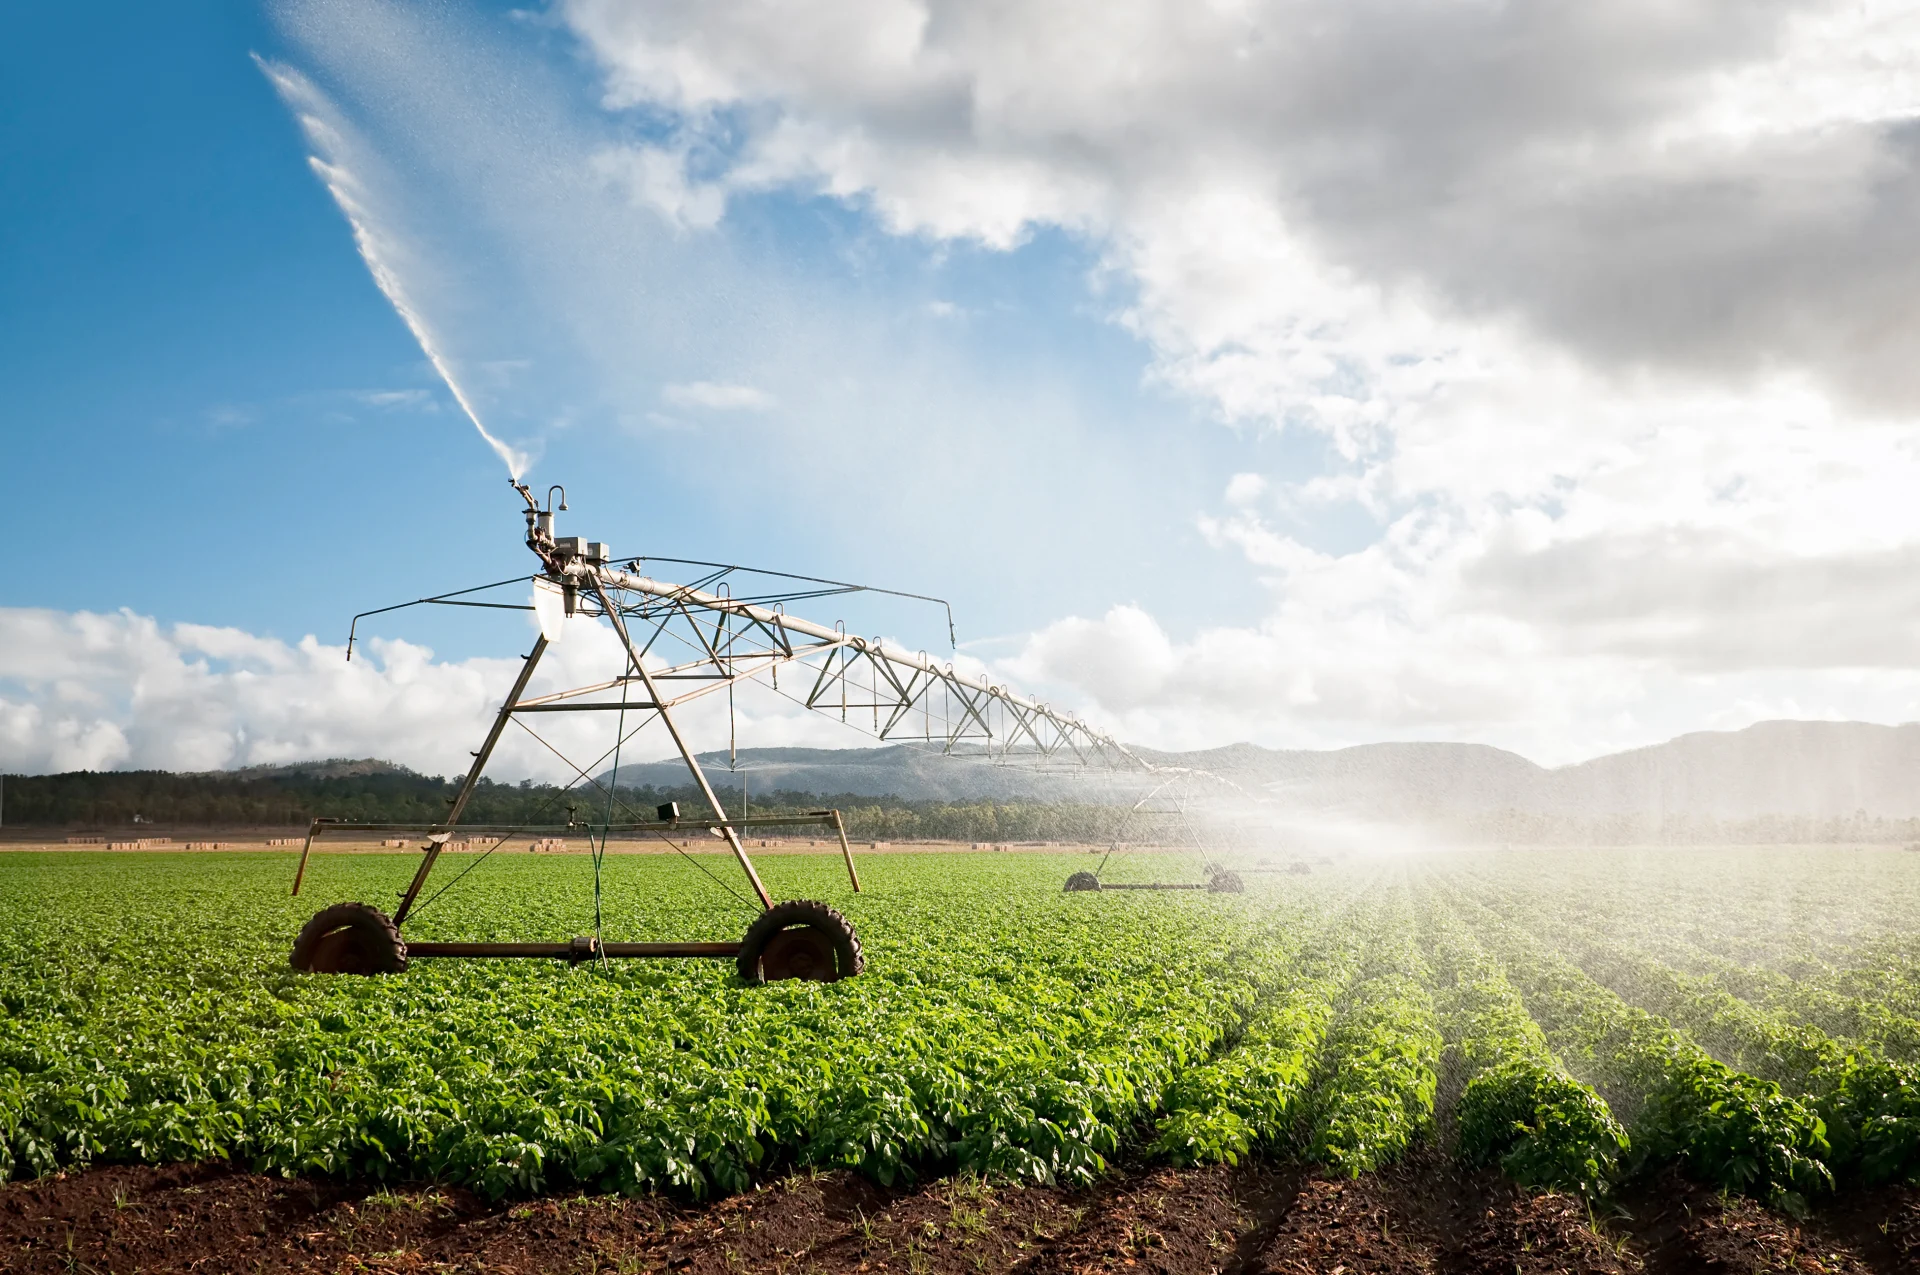 An irrigation system stands in a field, spraying water on the plants.